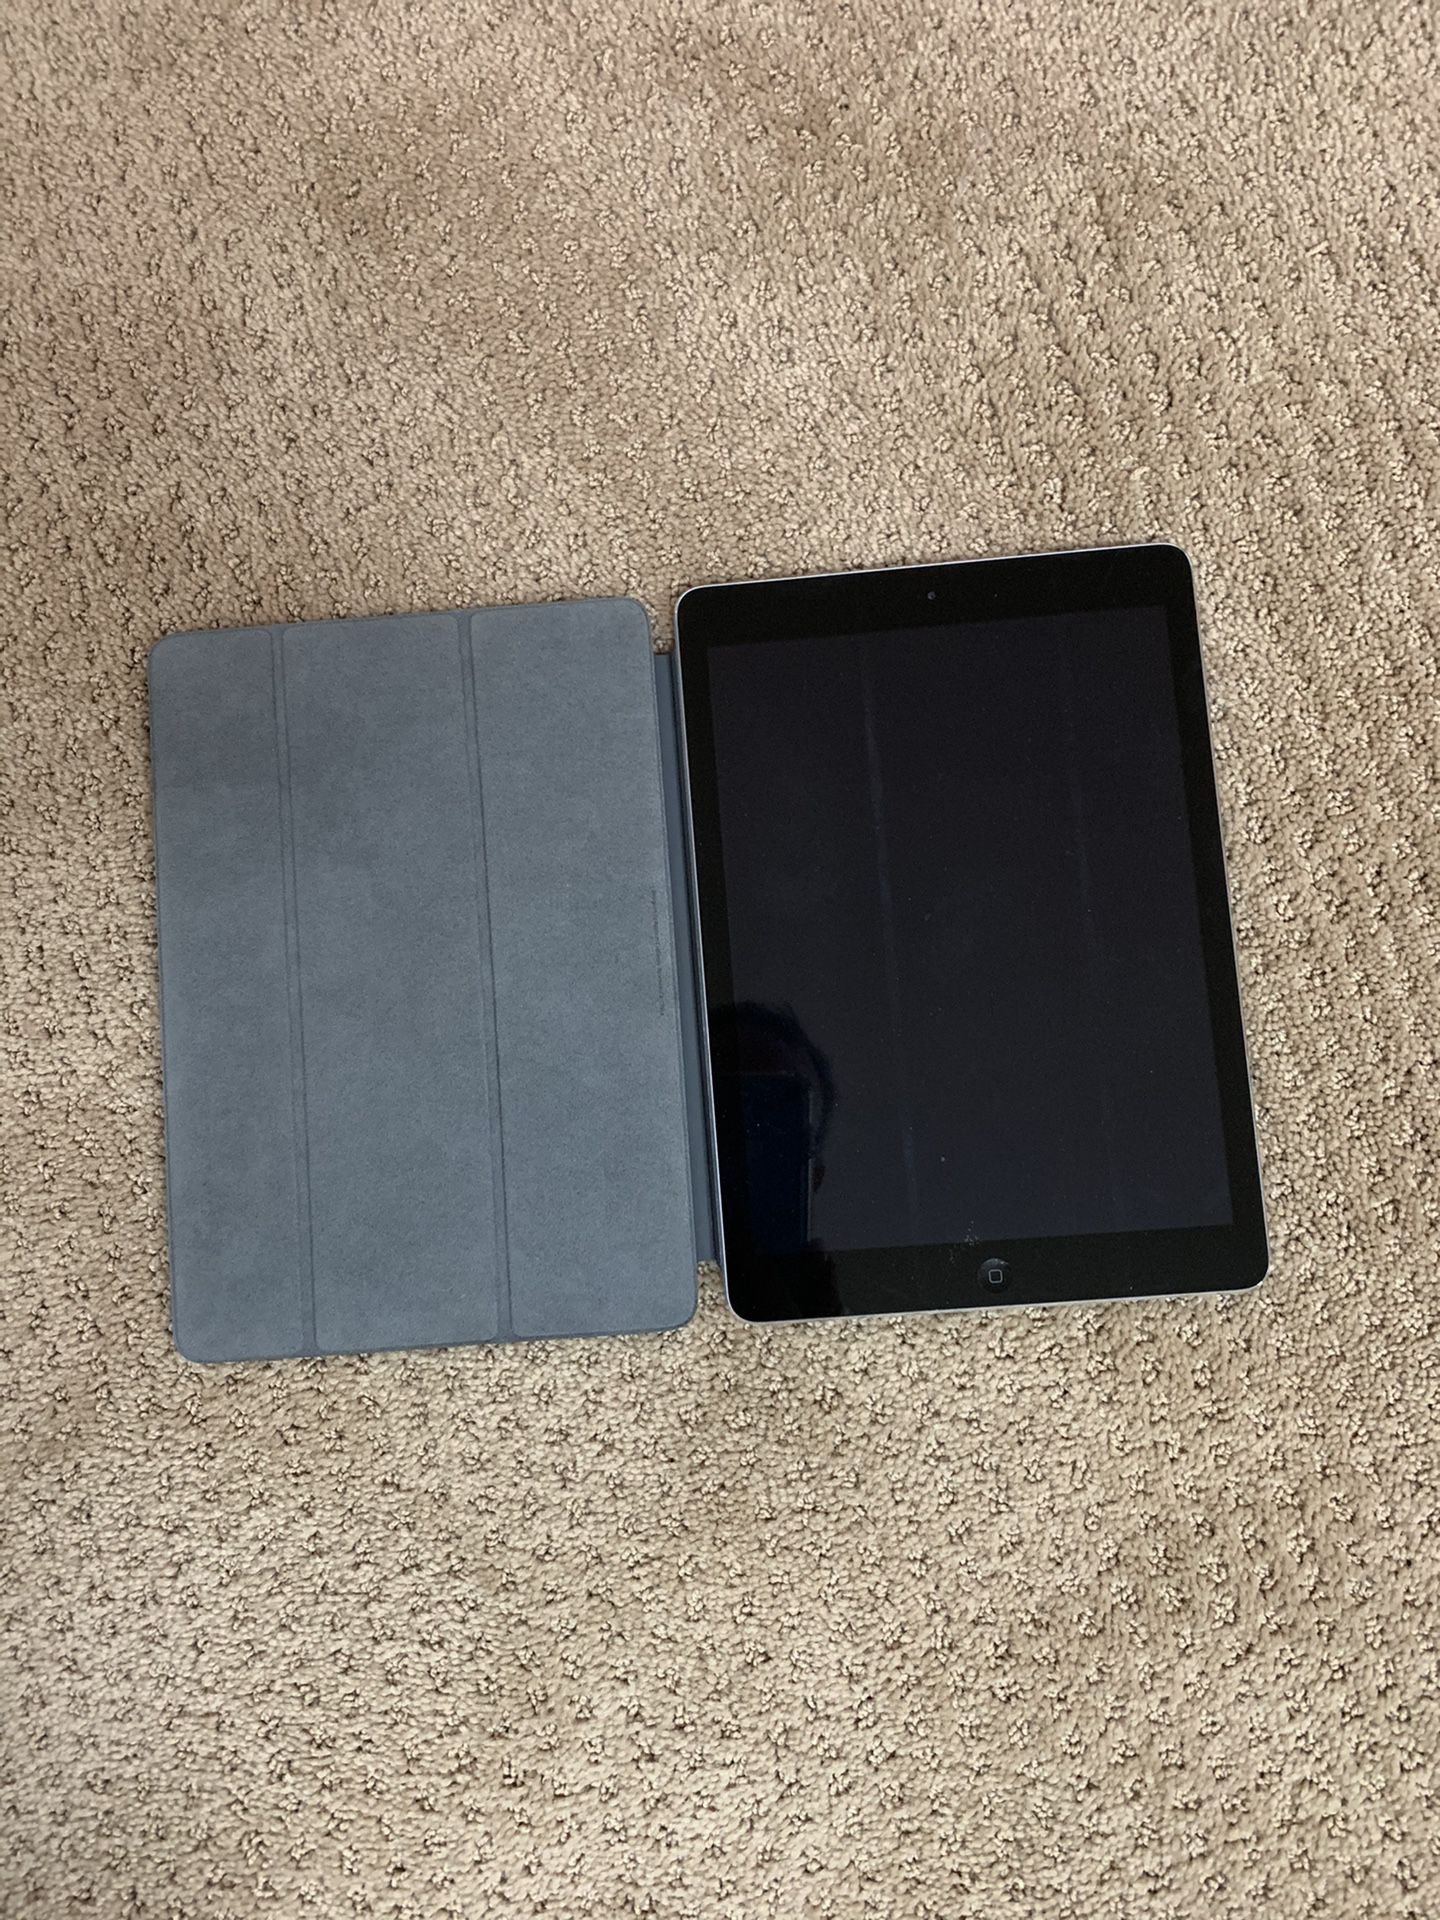 Apple IPAD air 1 32 GB with cover-REDUCED MUST SELL